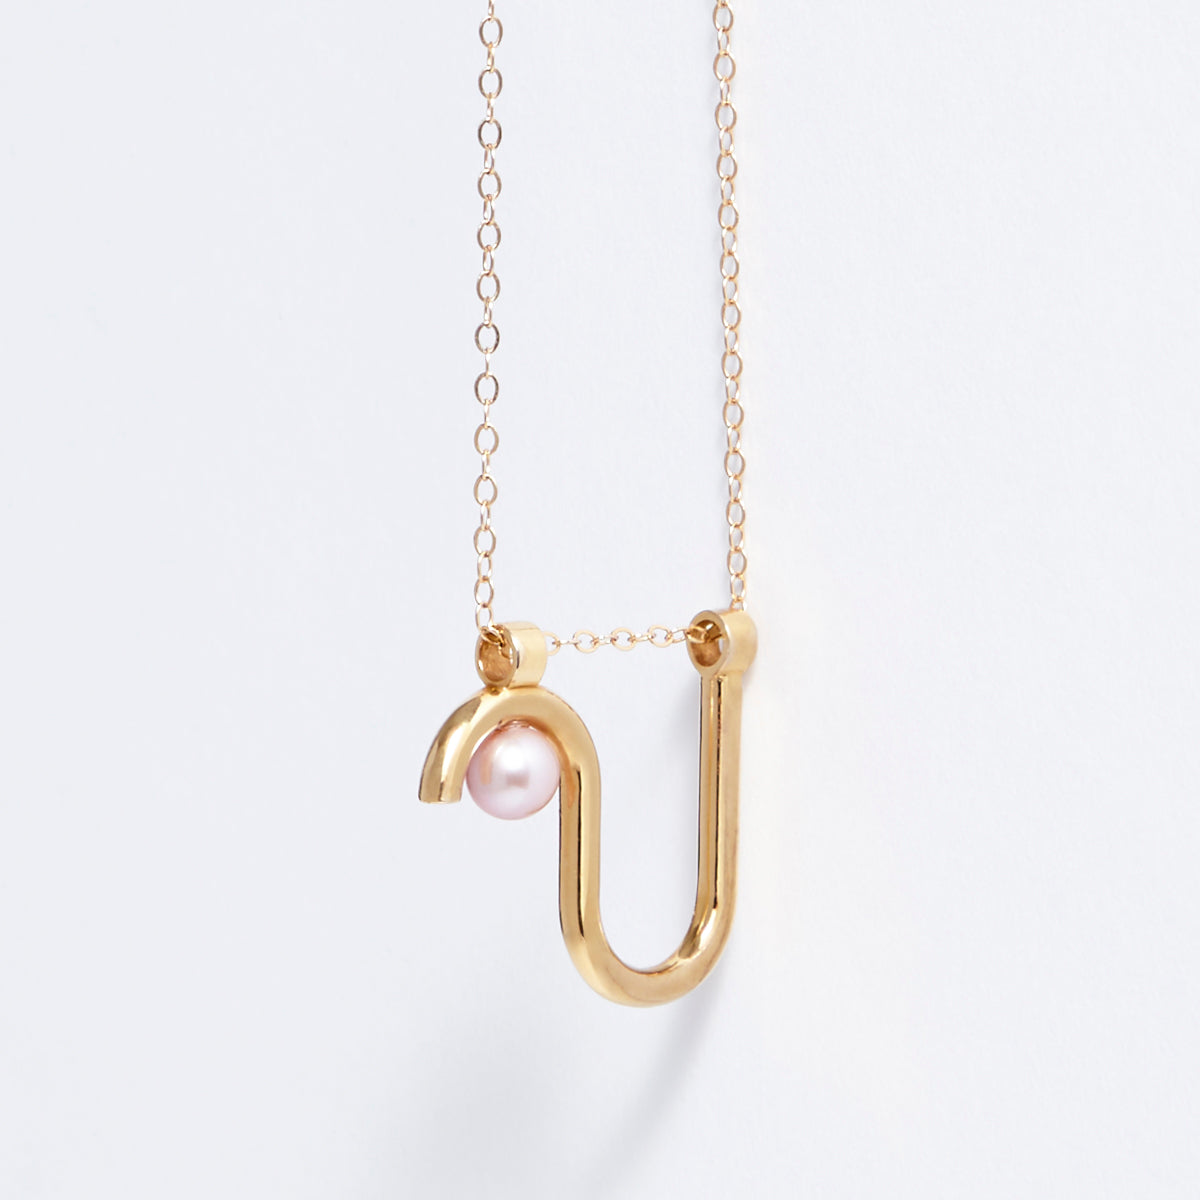 Arco necklace- 14k gold